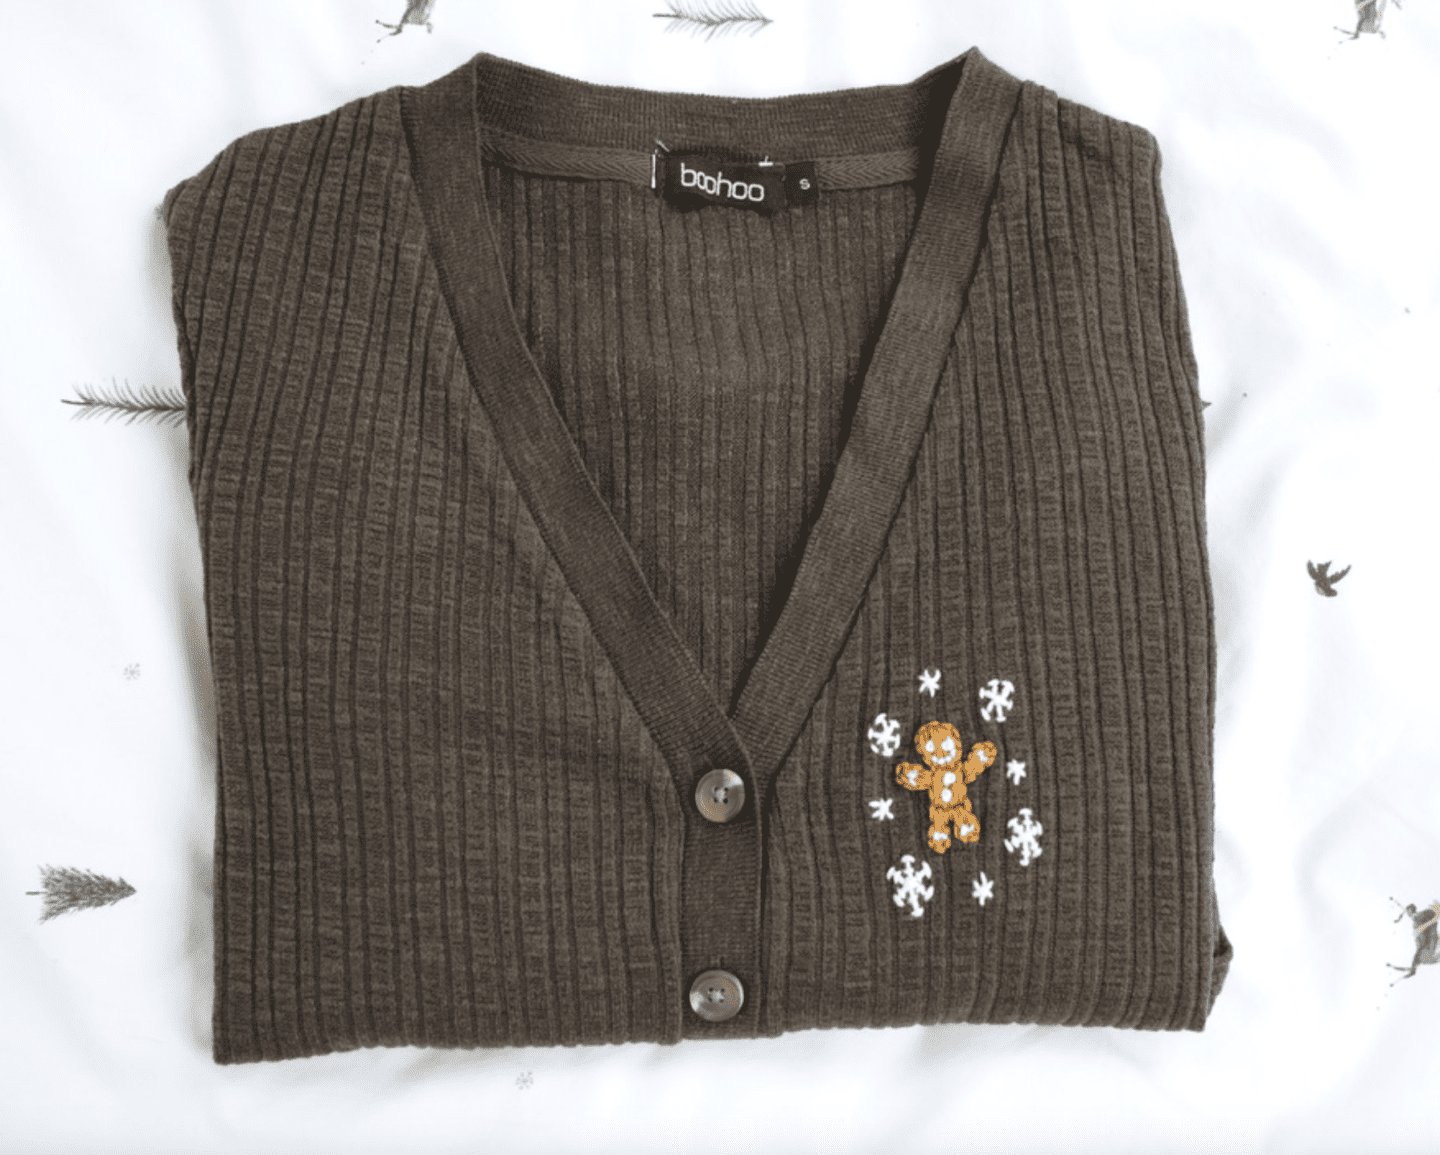 A khaki cardigan hand embroidered with a gingerbread man and snowflakes